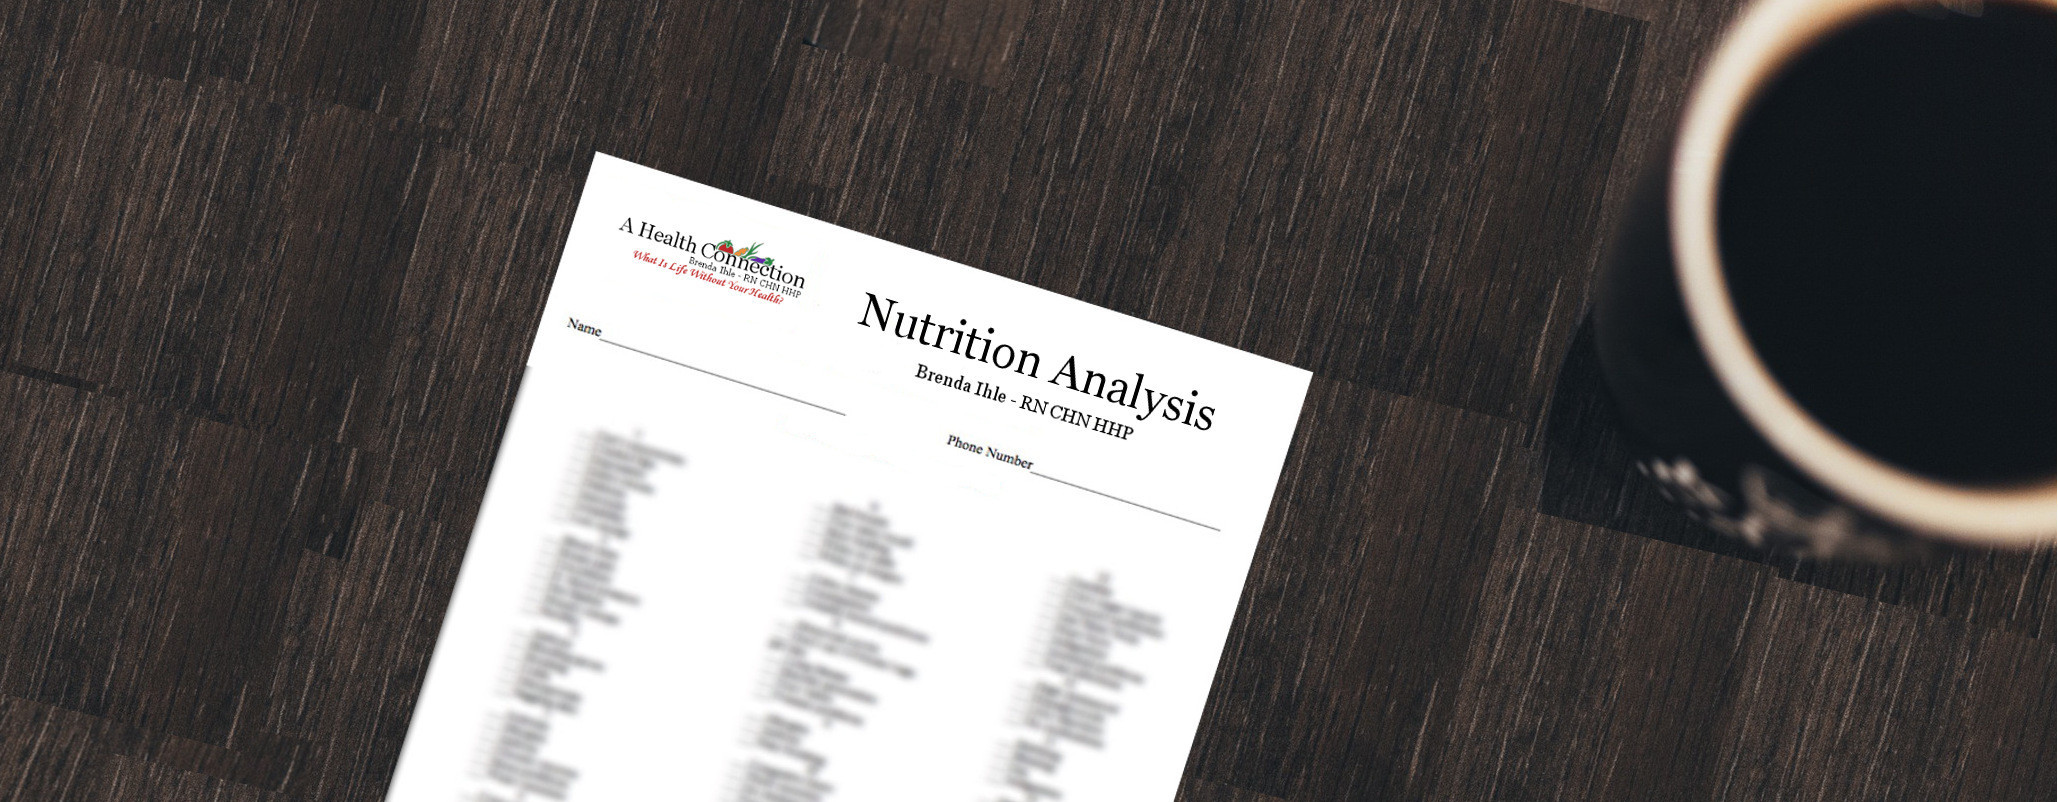 nutrition analysis form on a table